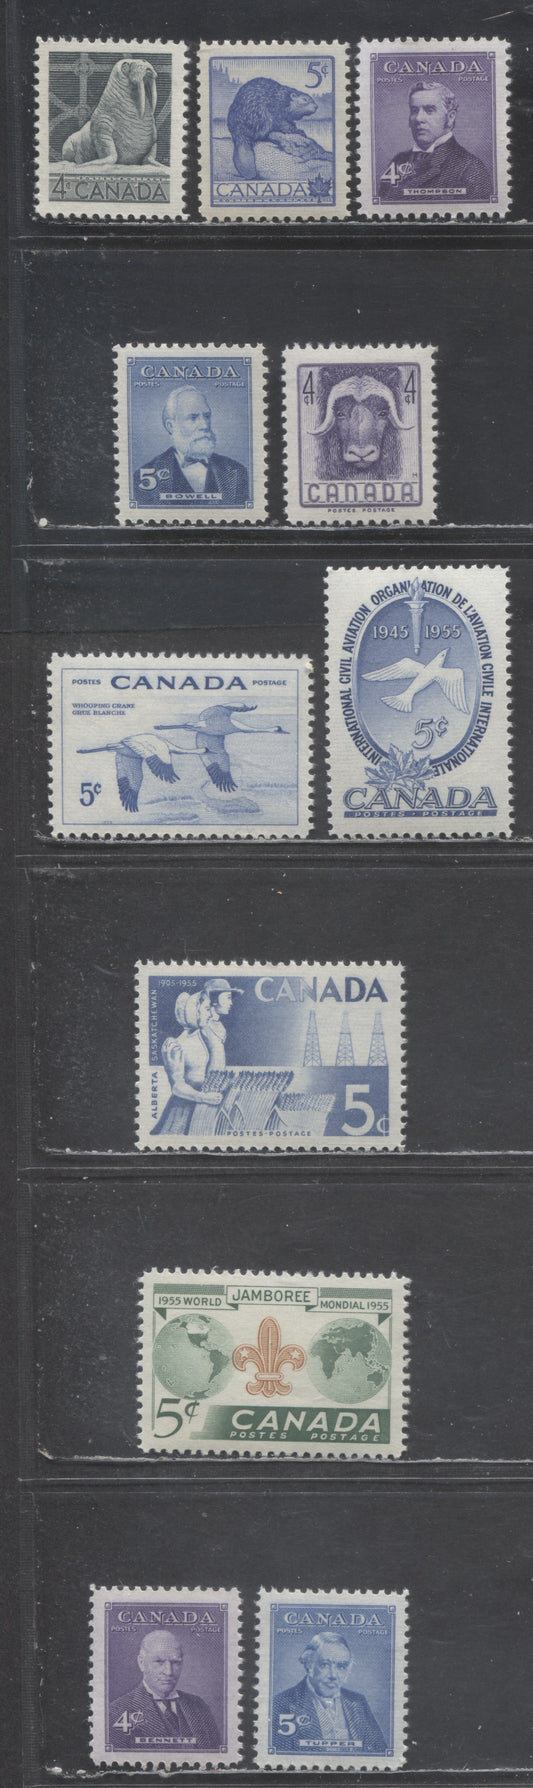 Lot 405 Canada #335-336, 349-350, 352-358 4c-5c Various Colours Various Subjects, 1954-1955 Wildlife Week Issue - Prime Ministers Issue, 11 VFNH Singles, Horizontally & Vertically Ribbed Papers,  Cream & Yellowish Cream Gums